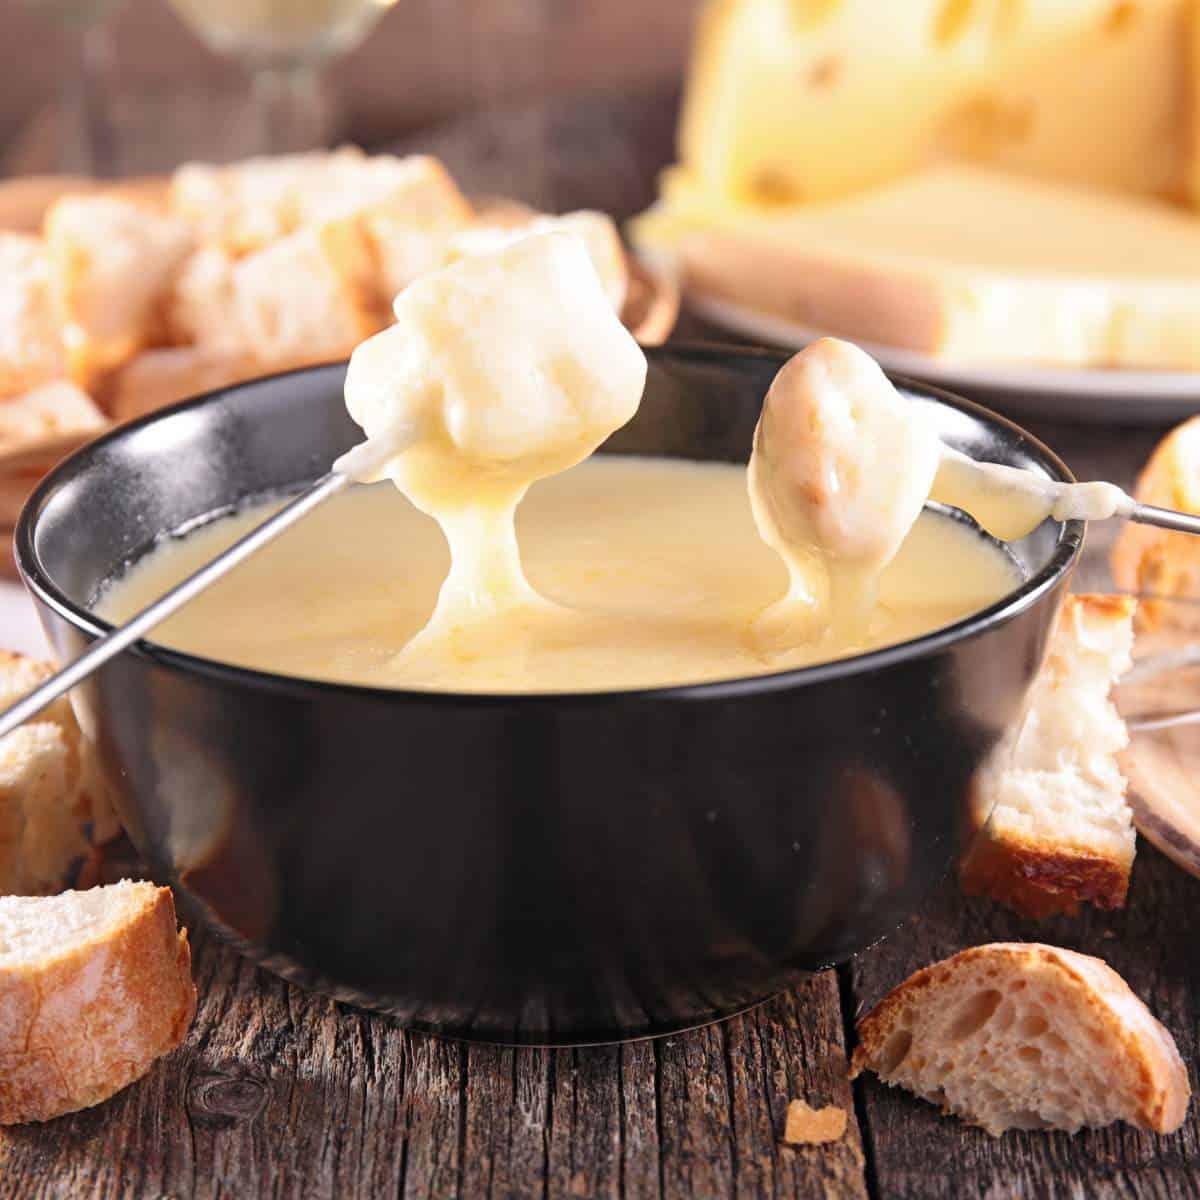 A delicious breakfast in Switzerland featuring a bowl of fondue with bread and cheese.